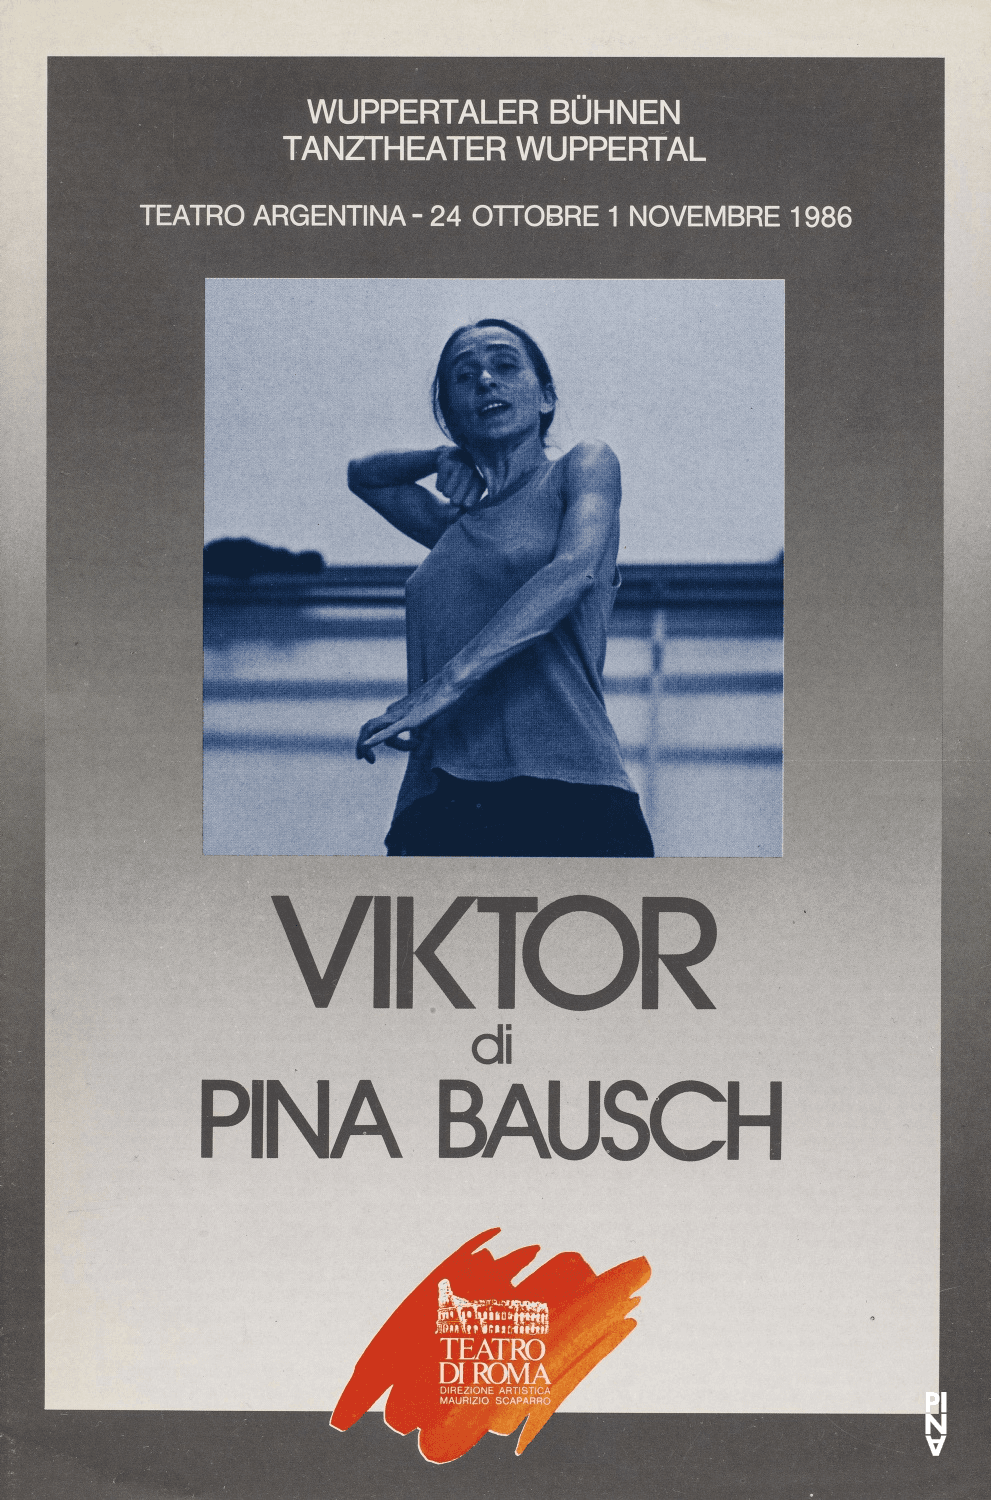 Booklet for “Viktor” by Pina Bausch with Tanztheater Wuppertal in in Rome, 10/24/1986 – 11/01/1986